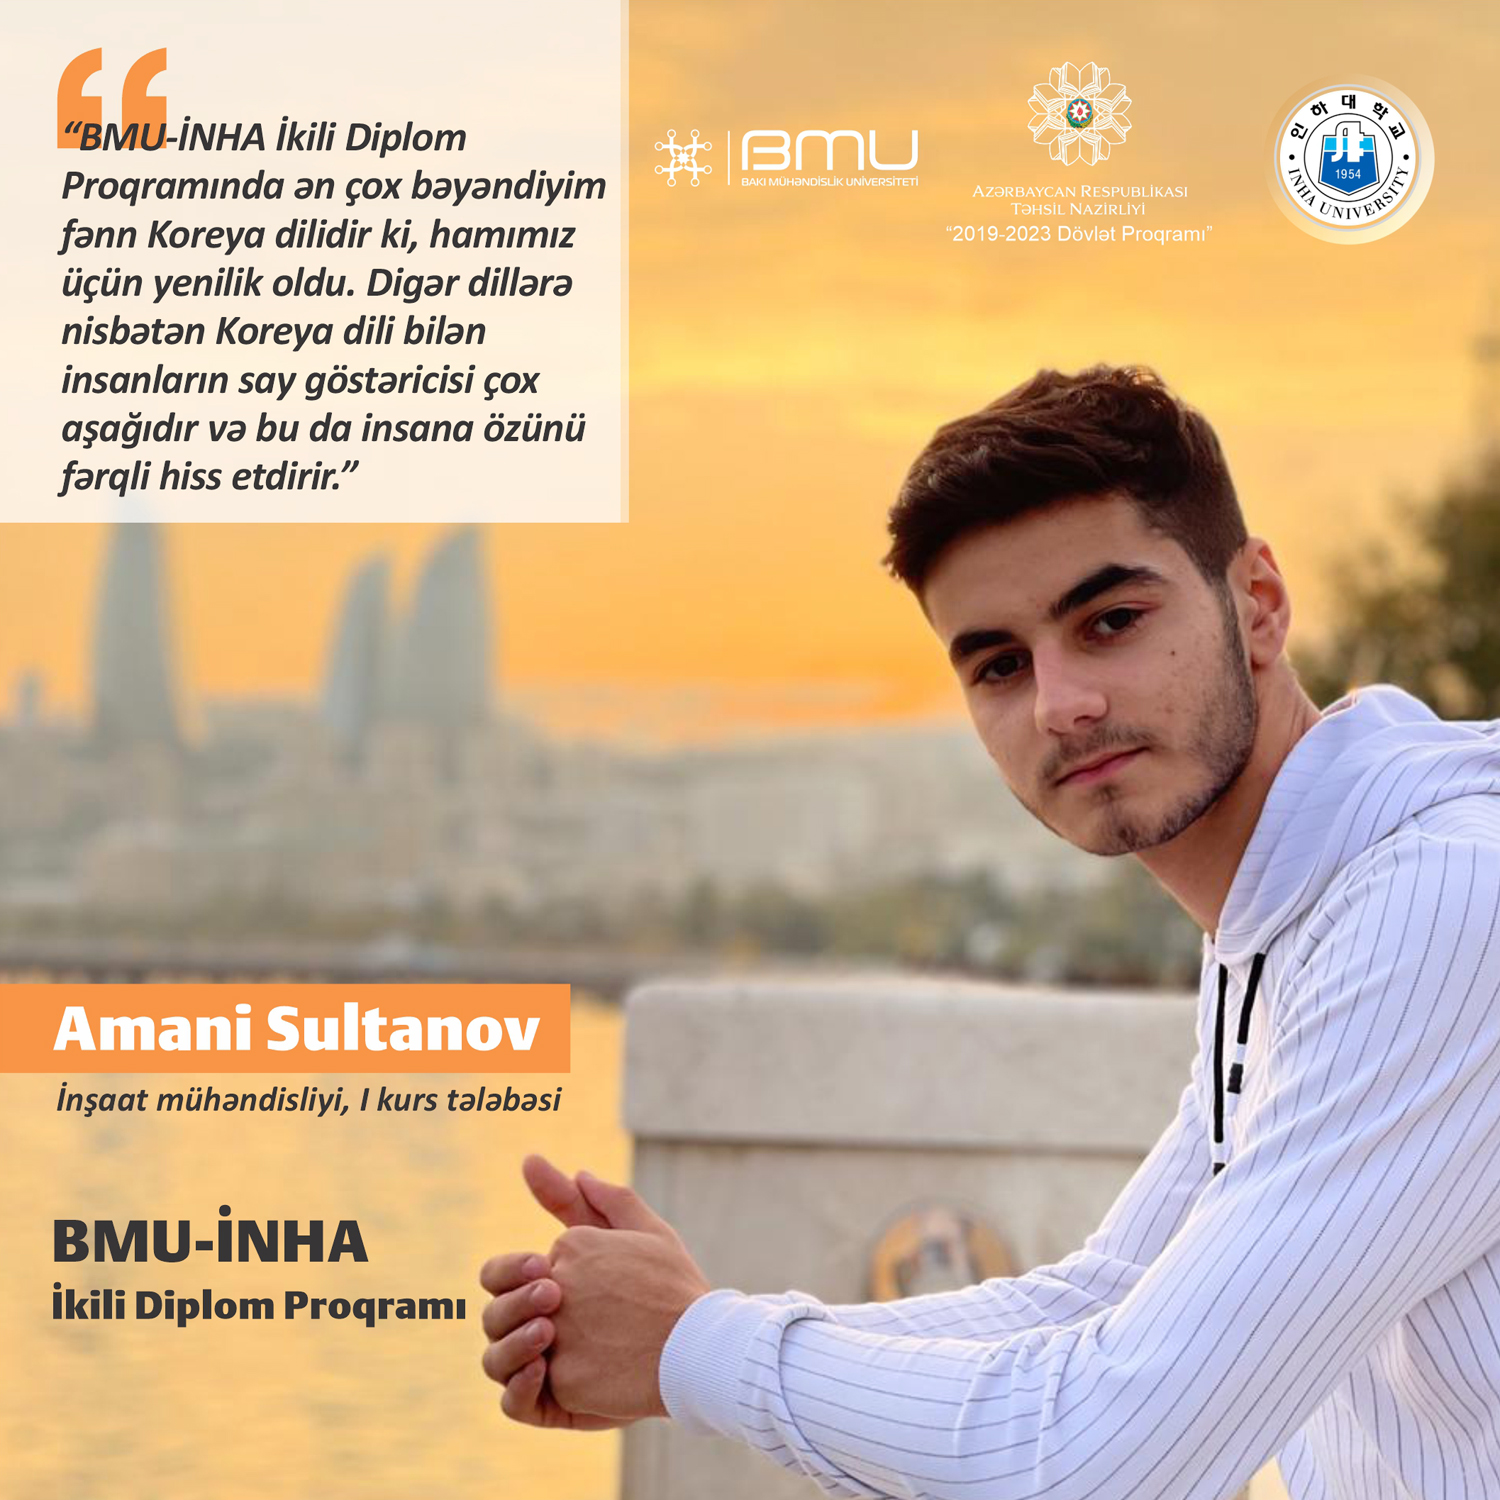 “Students of Dual Degree Program were given a great chance”